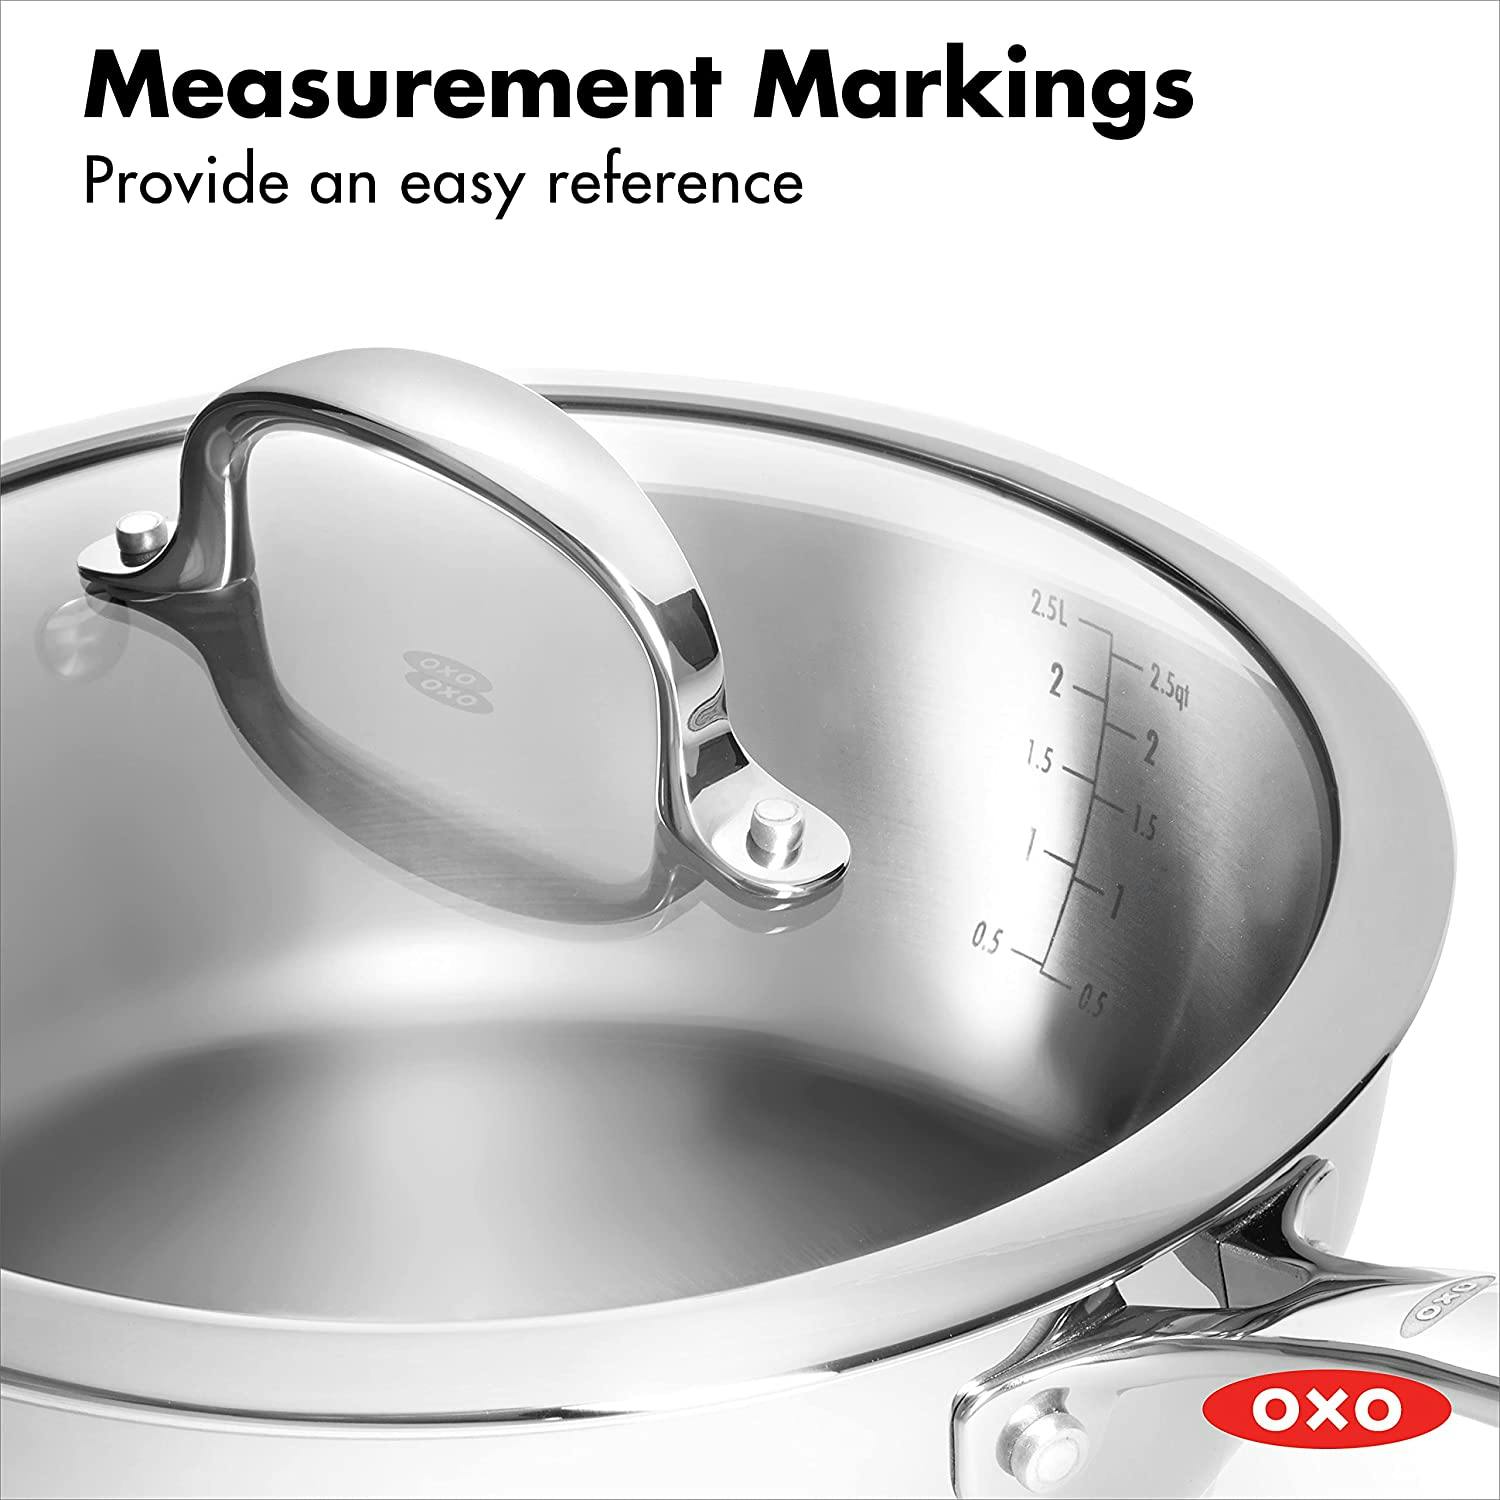 OXO Mira Tri-Ply Stainless Steel, 3.5 QT Covered Chef's Pan with Lid